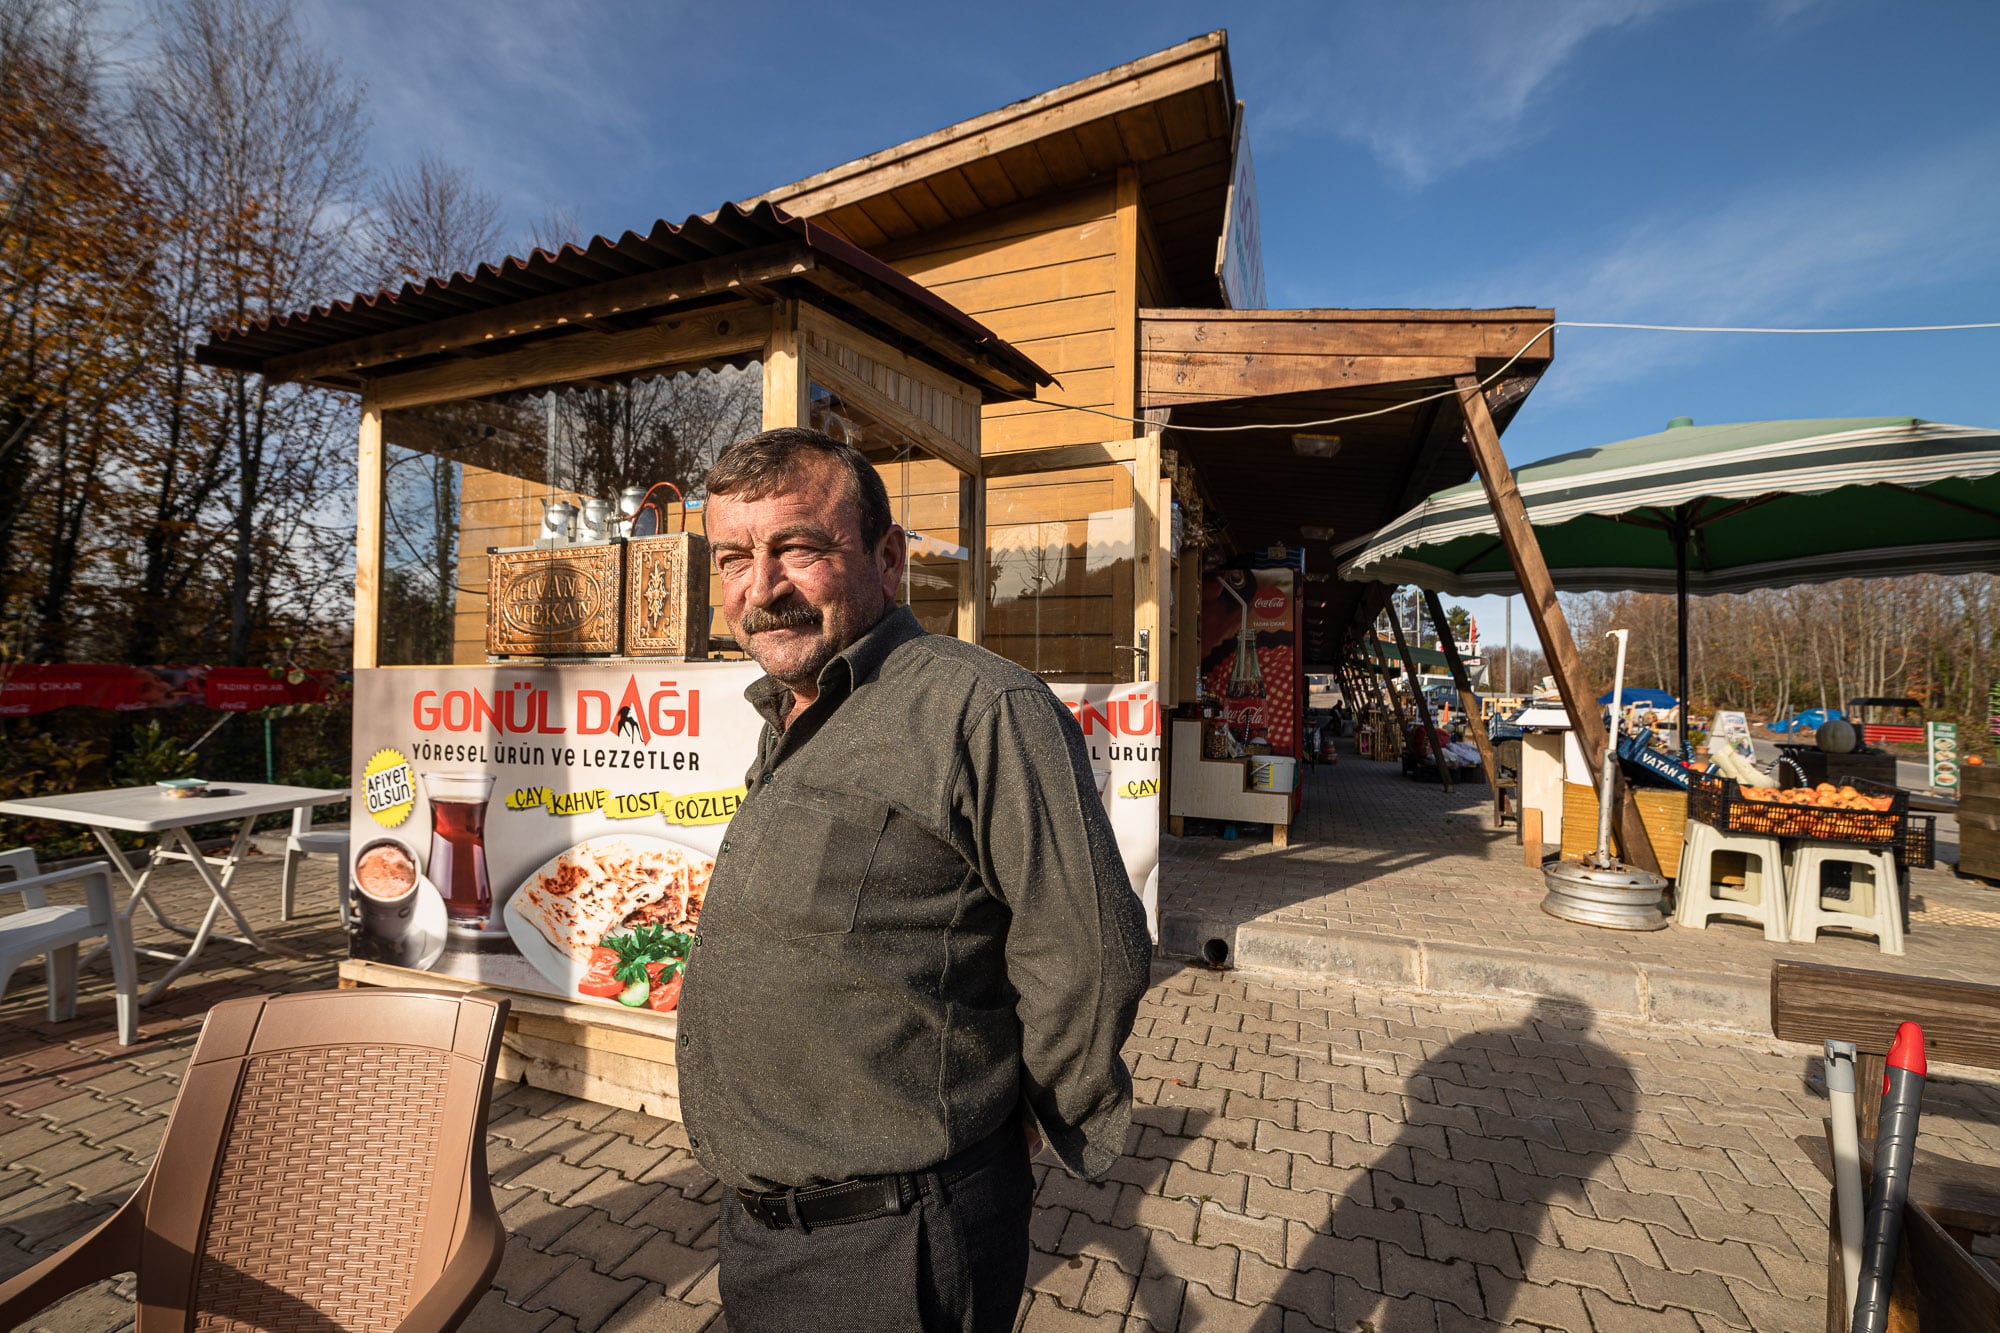 café owner on my walk from the Martyrs' Forest and Eregli